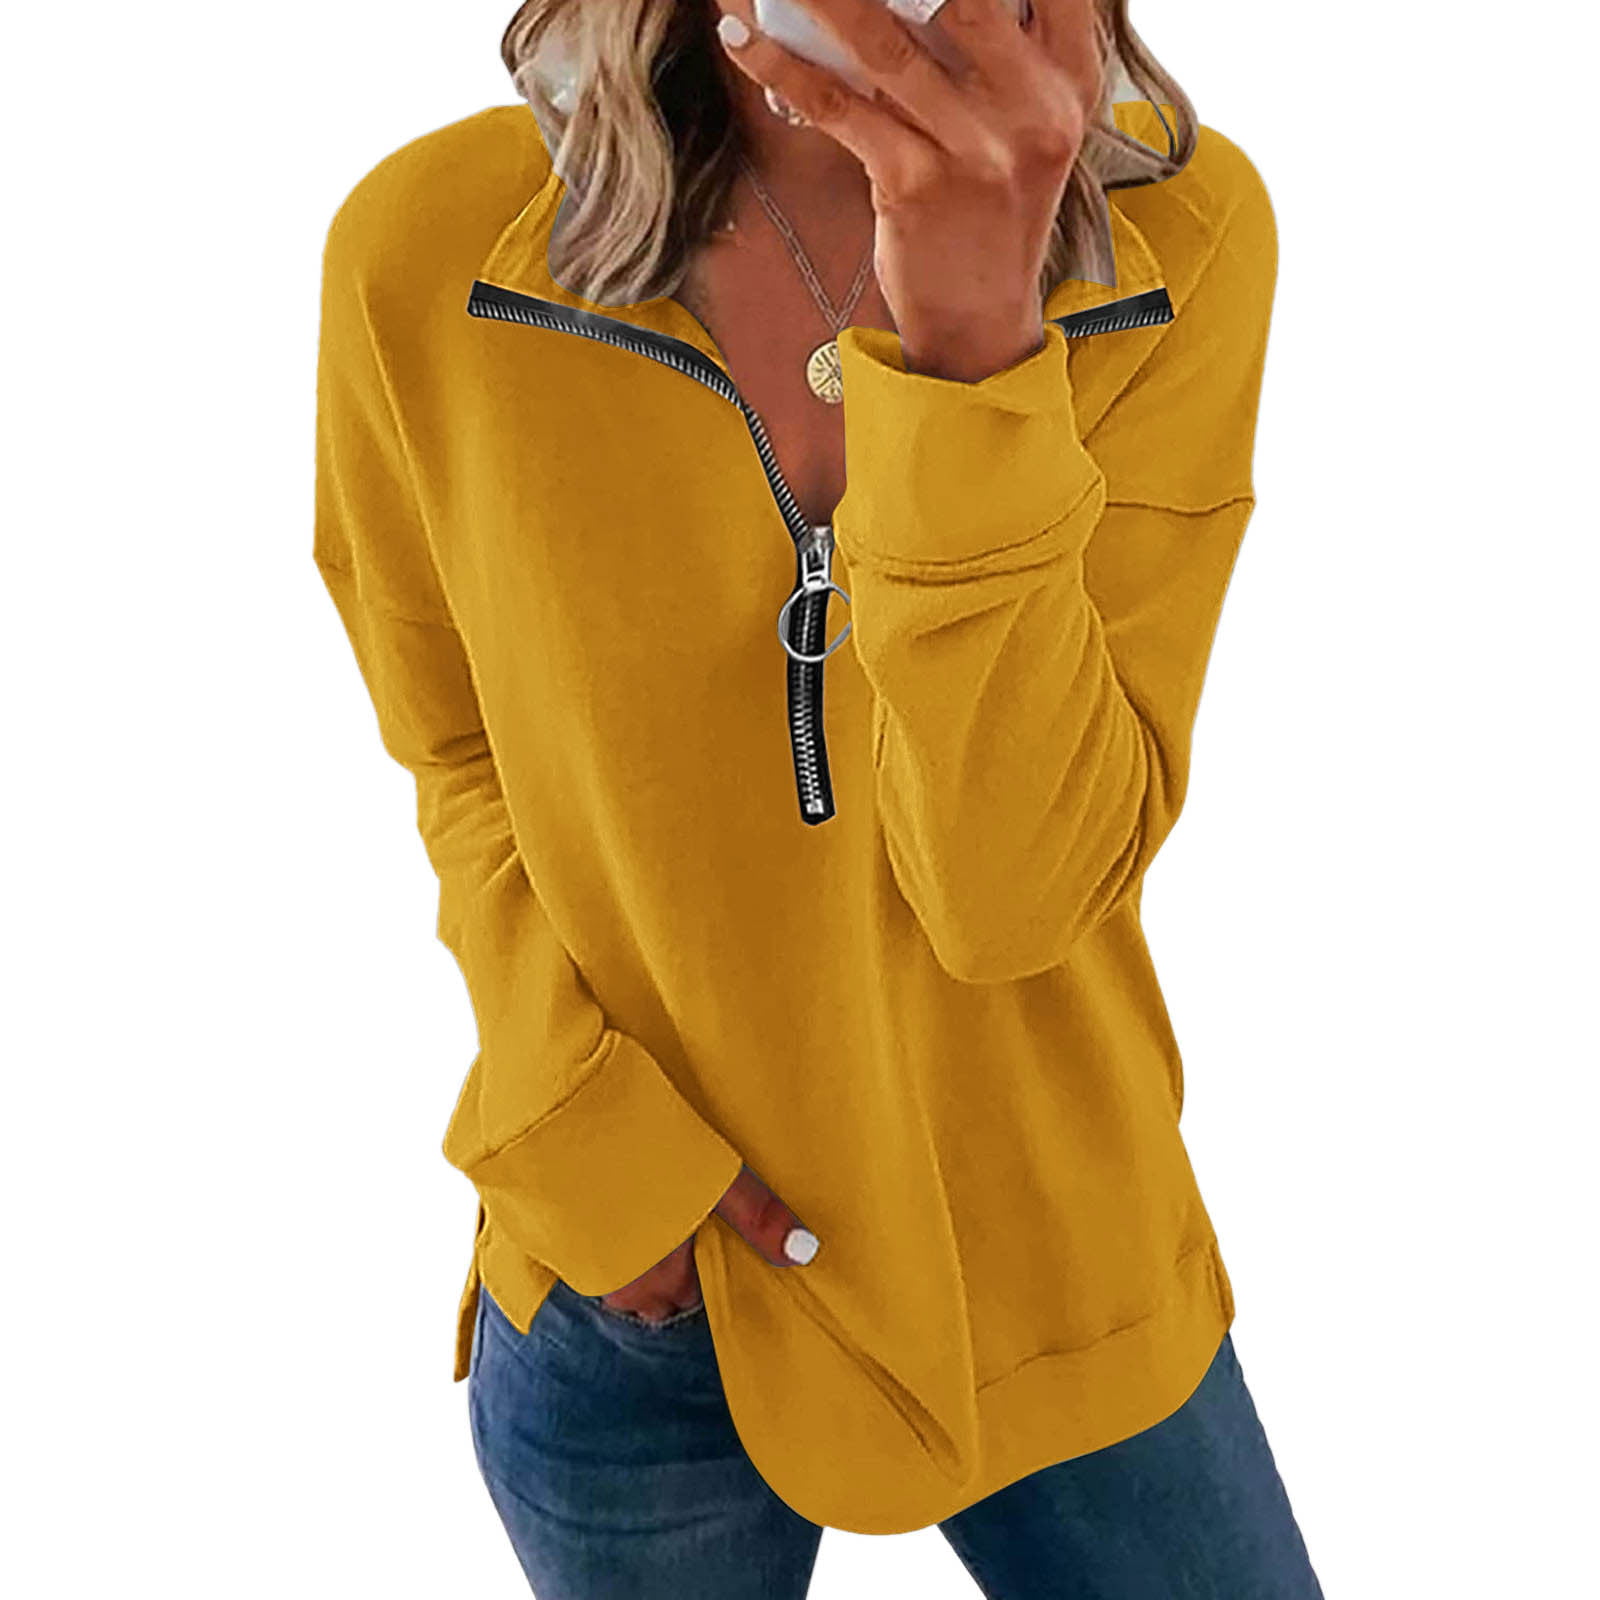 Women's pale yellow zip-up hoodie (Hollister) - S – Second Heart Clothing